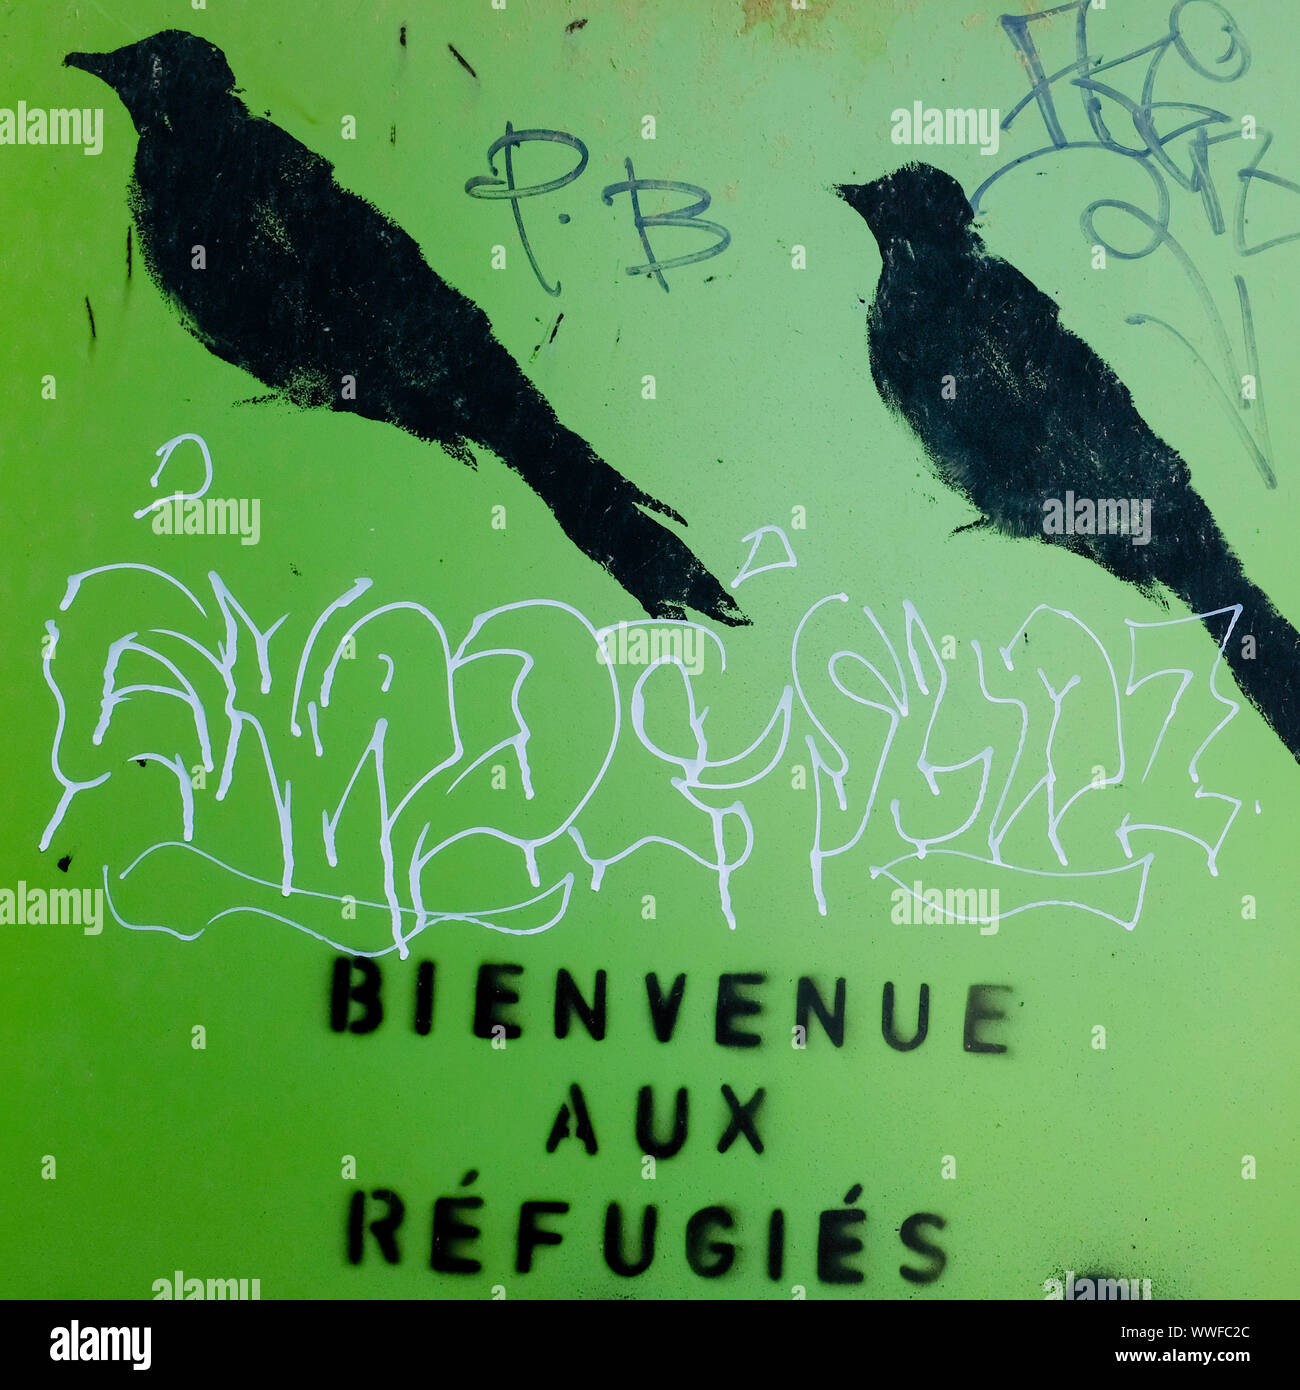 Refugees welcome says this graffiti in Montreal Stock Photo